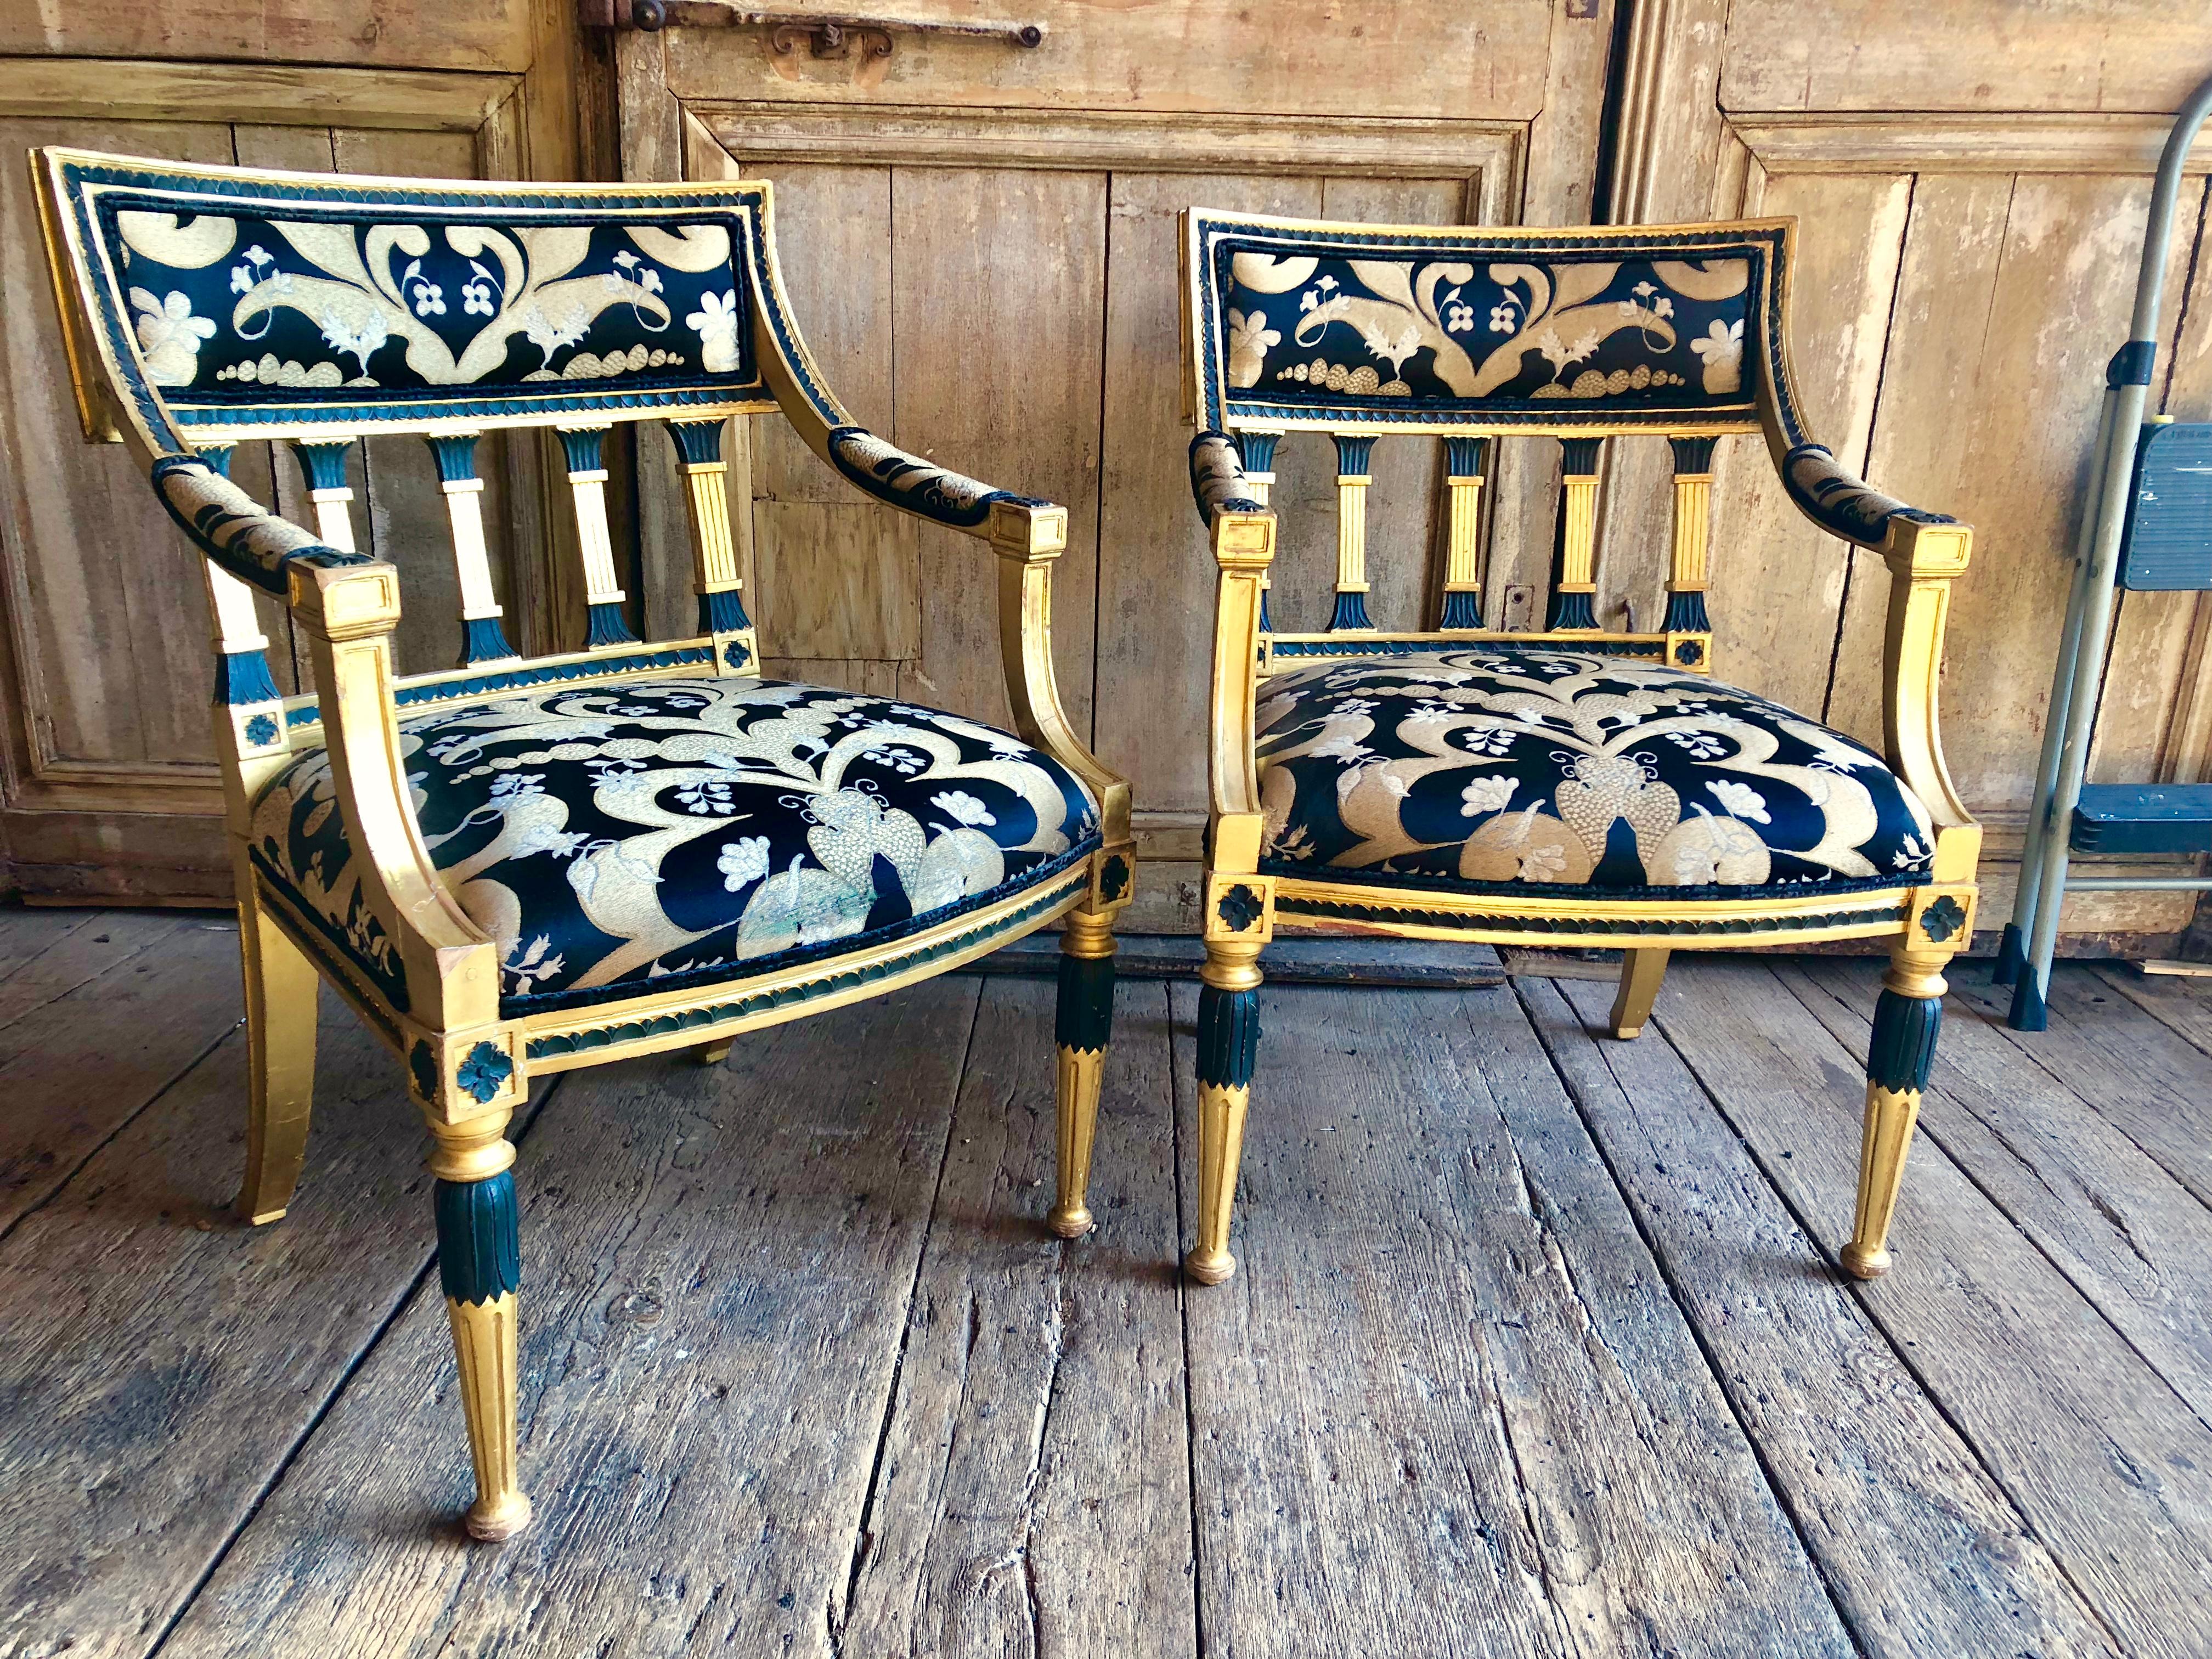 A pair of Swedish giltwood Armchairs in the neoclassical manner, late 18th/early 19th Century, with black painted accents, the back and seat upholstered in gold, cream and black silk needlepoint fabric (wear to front edge of fabric on one seat).